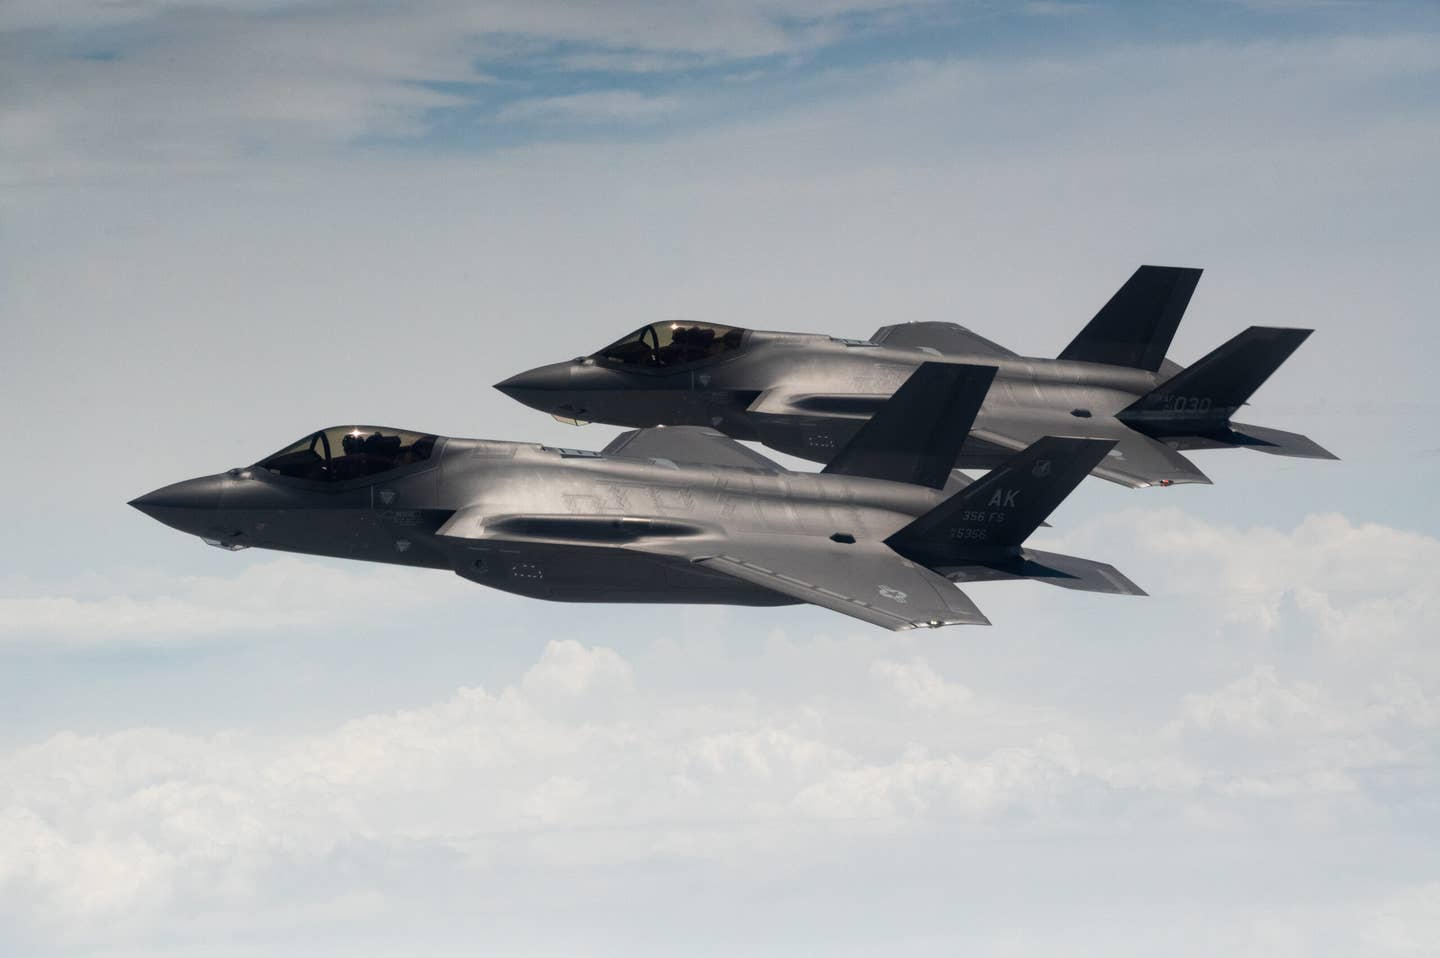 U.S. Air Force F-35 Lightning IIs from the 356th Fighter Squadron at Eielson Air Force Base fly side by side with Republic of Korea Air Force F-35s from the 151st and 152nd Combat Flight Squadrons. <em>Credit: U.S. Air Force</em>